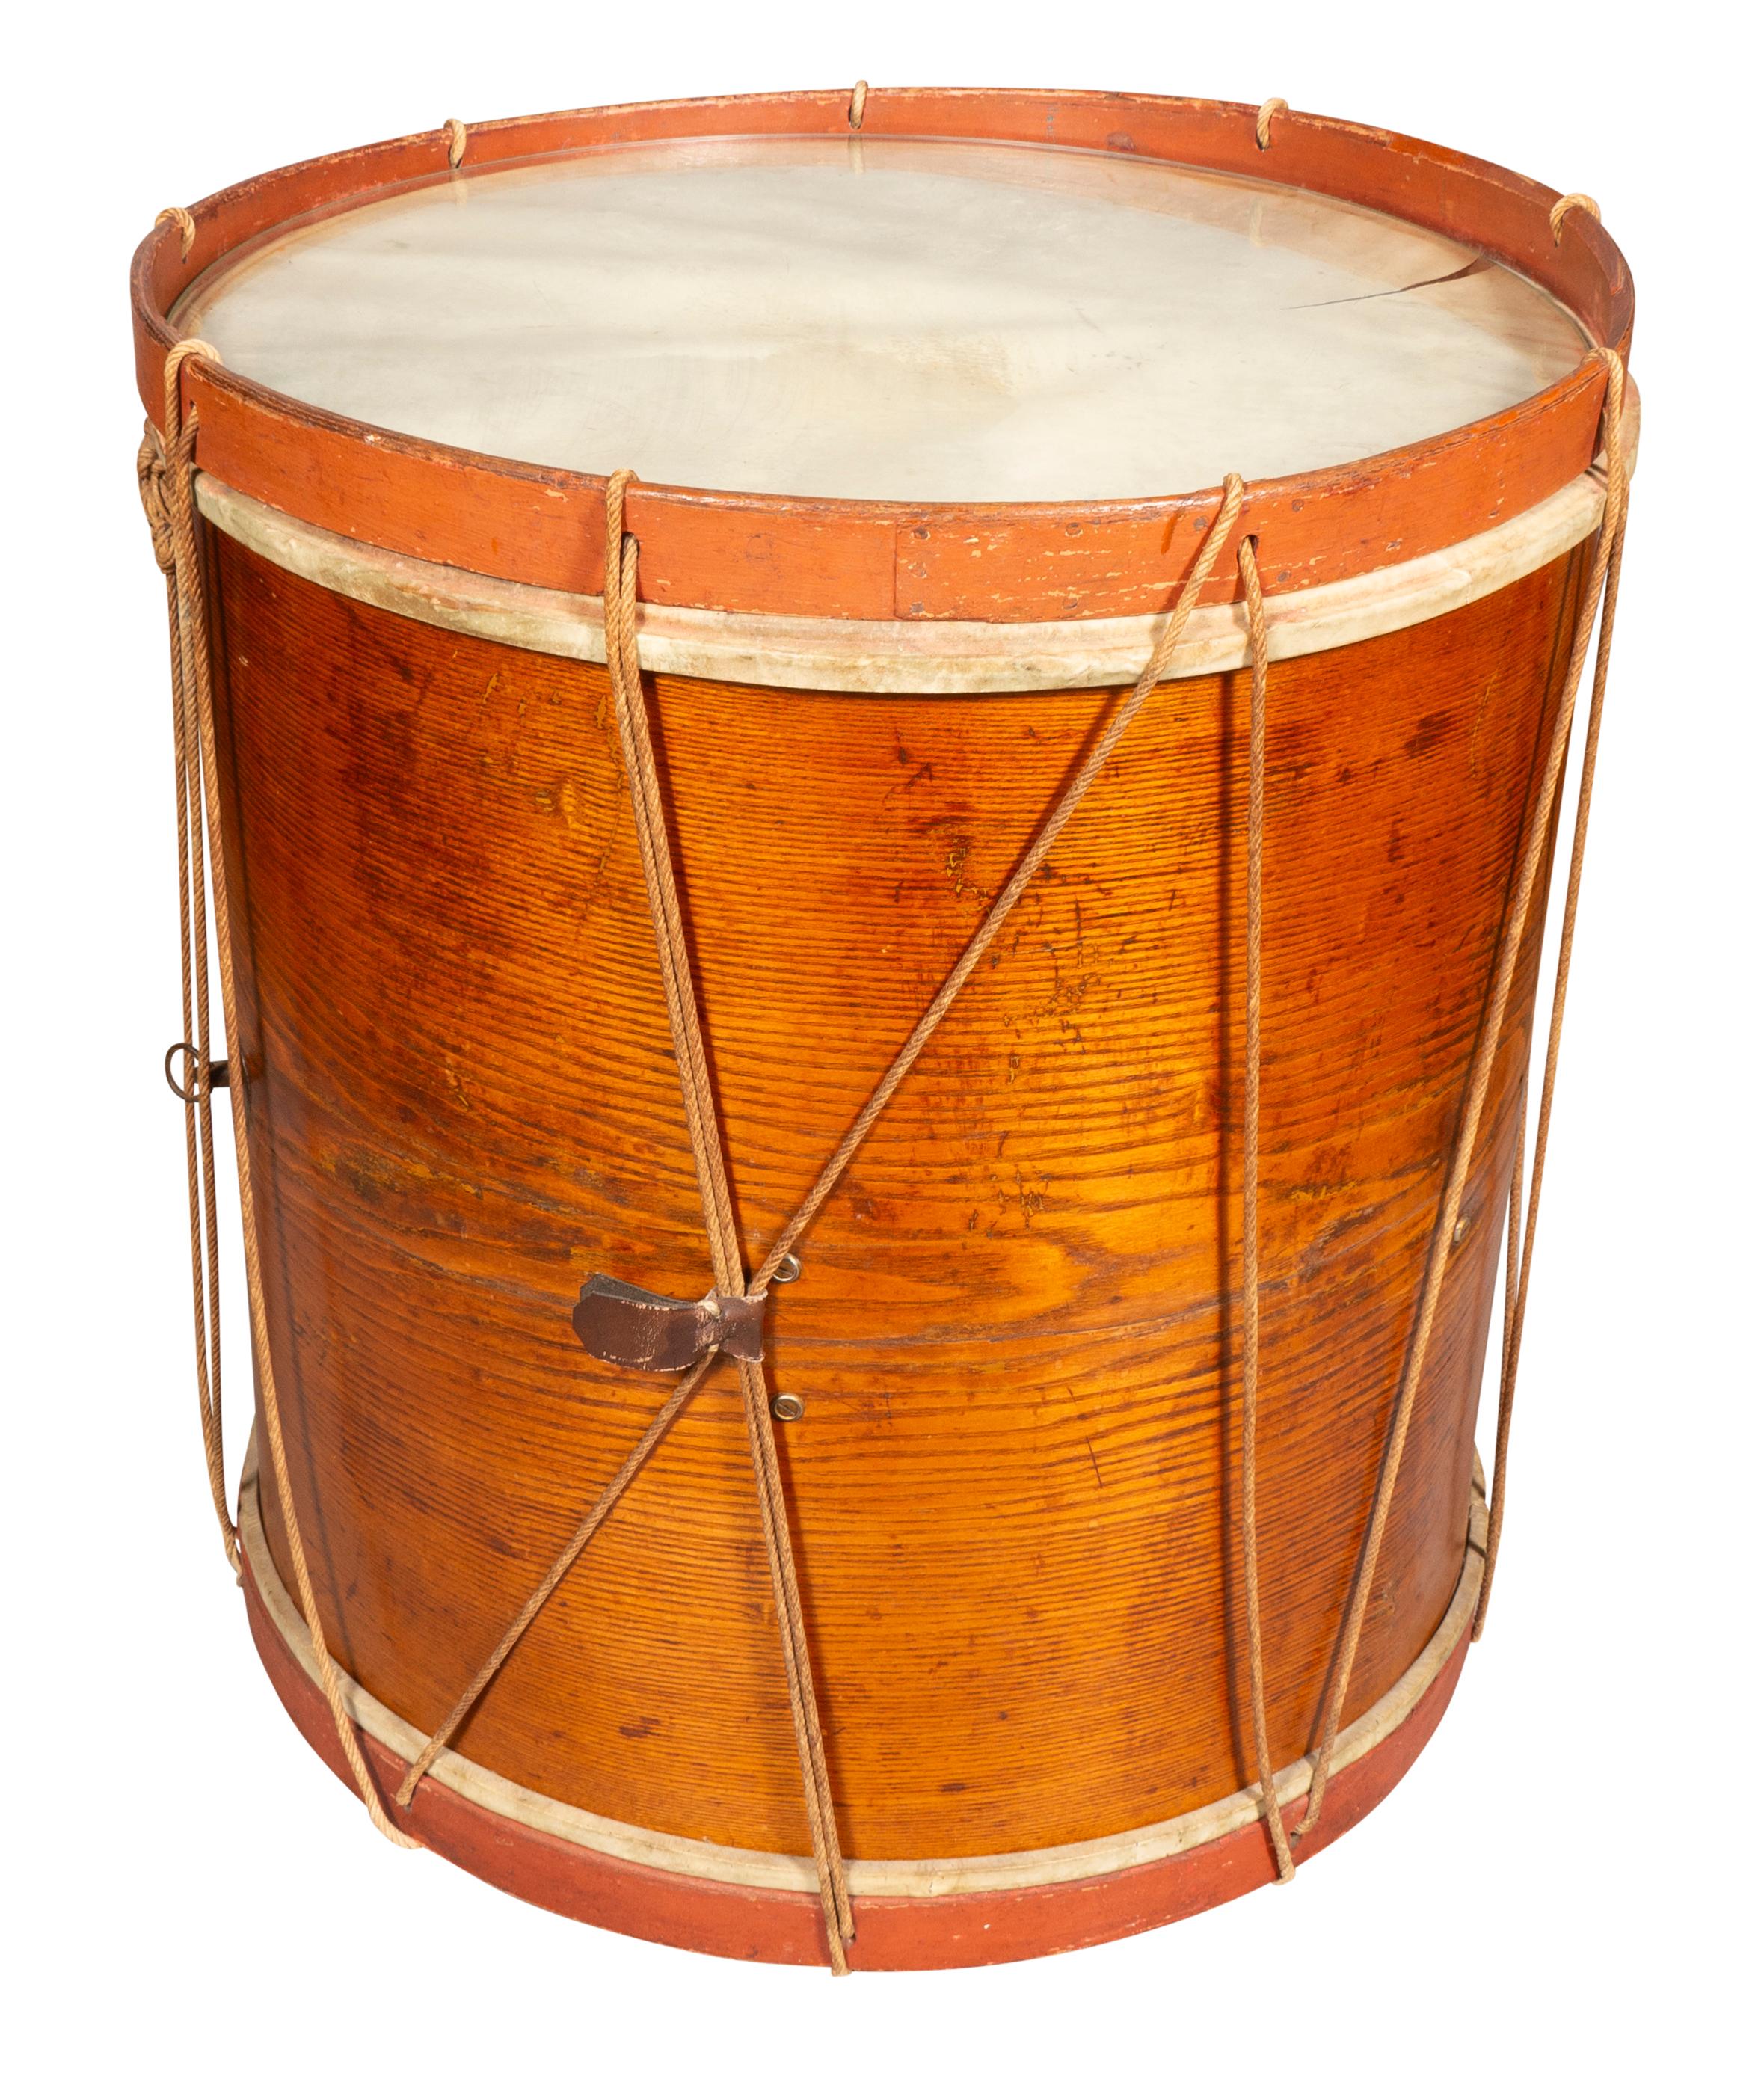 American Painted Ash Drum Now A Table In Fair Condition For Sale In Essex, MA